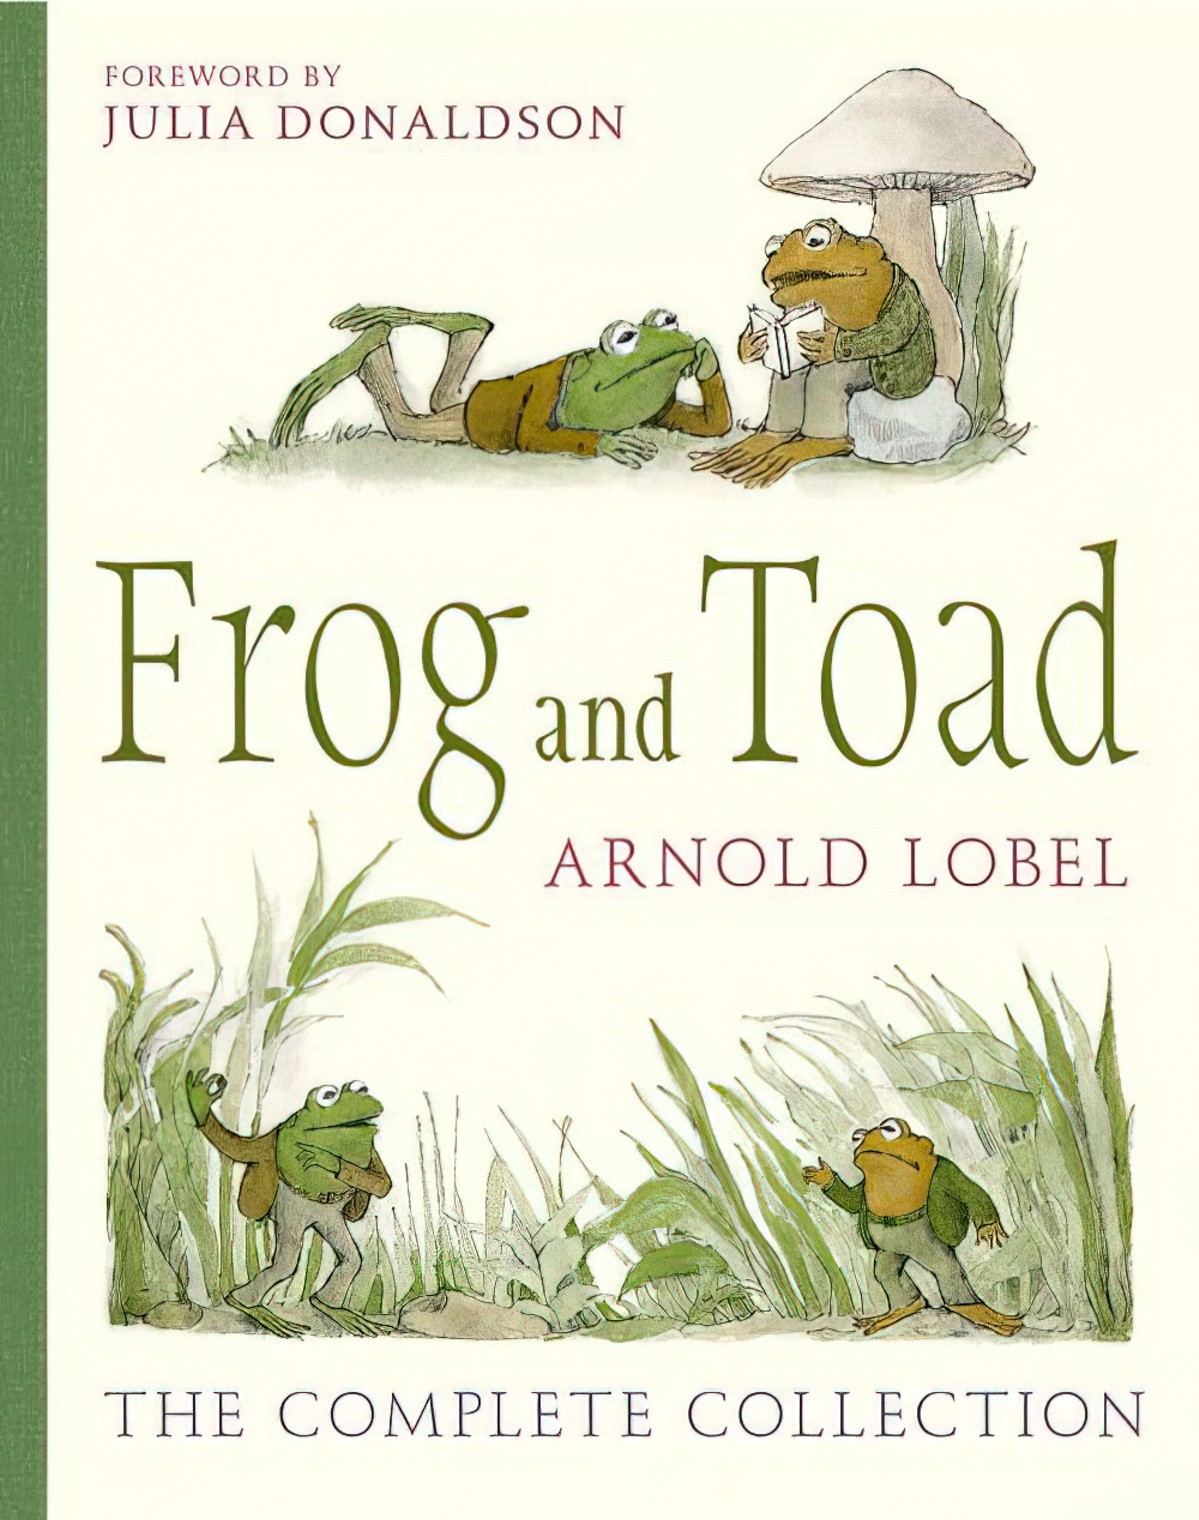 Arnold Lobel’s Frog and Toad: A Case Study In Kindness